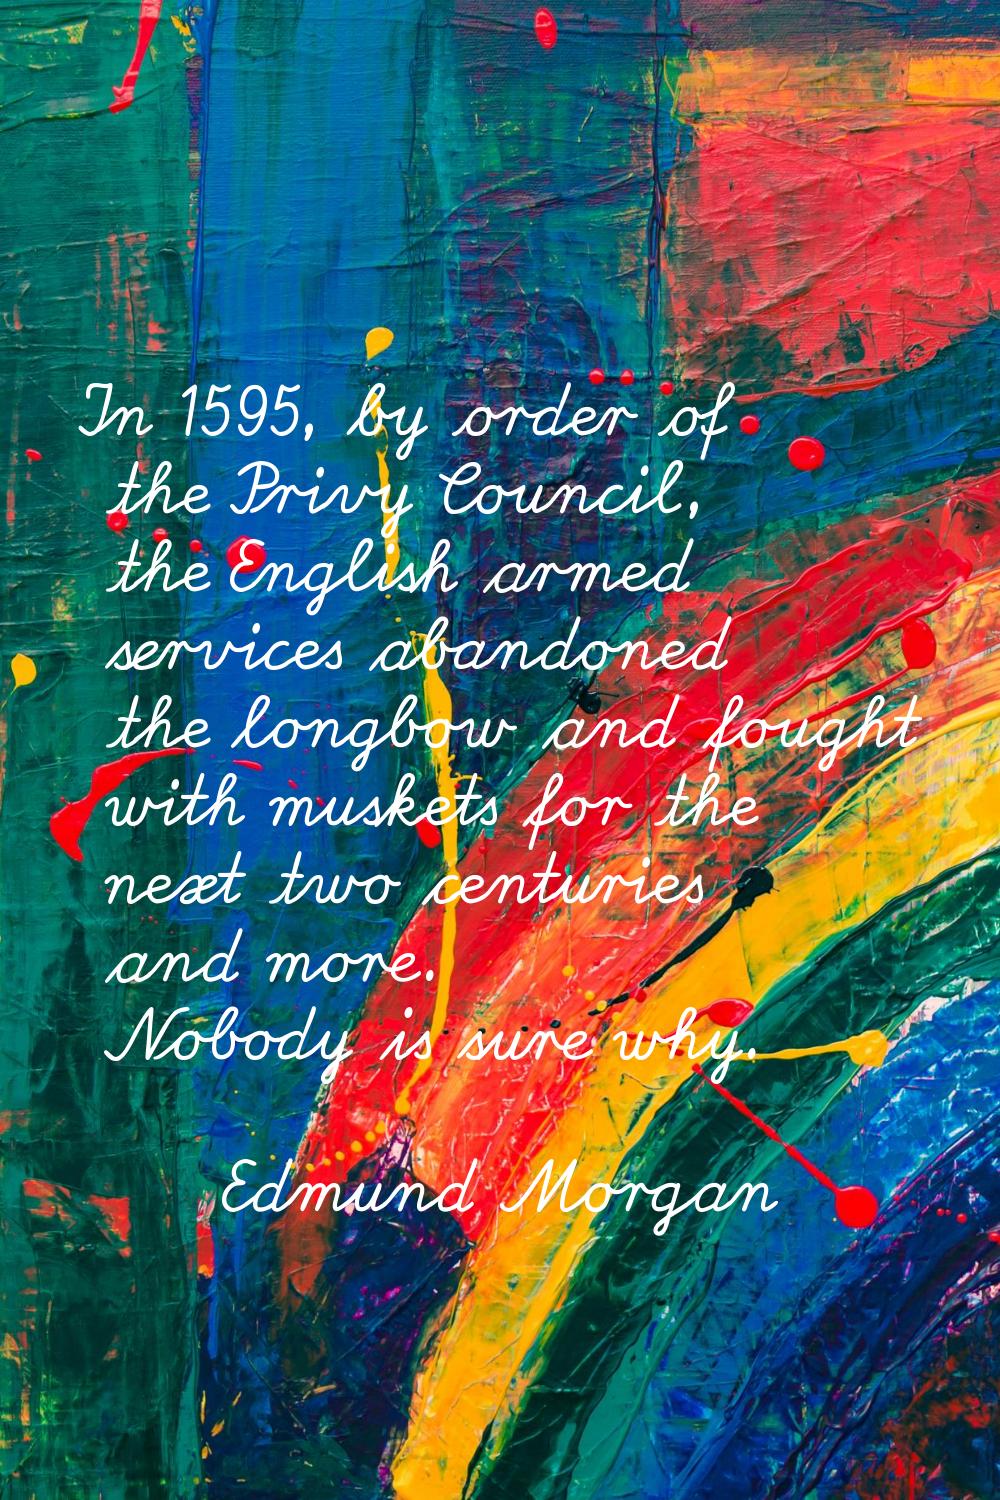 In 1595, by order of the Privy Council, the English armed services abandoned the longbow and fought